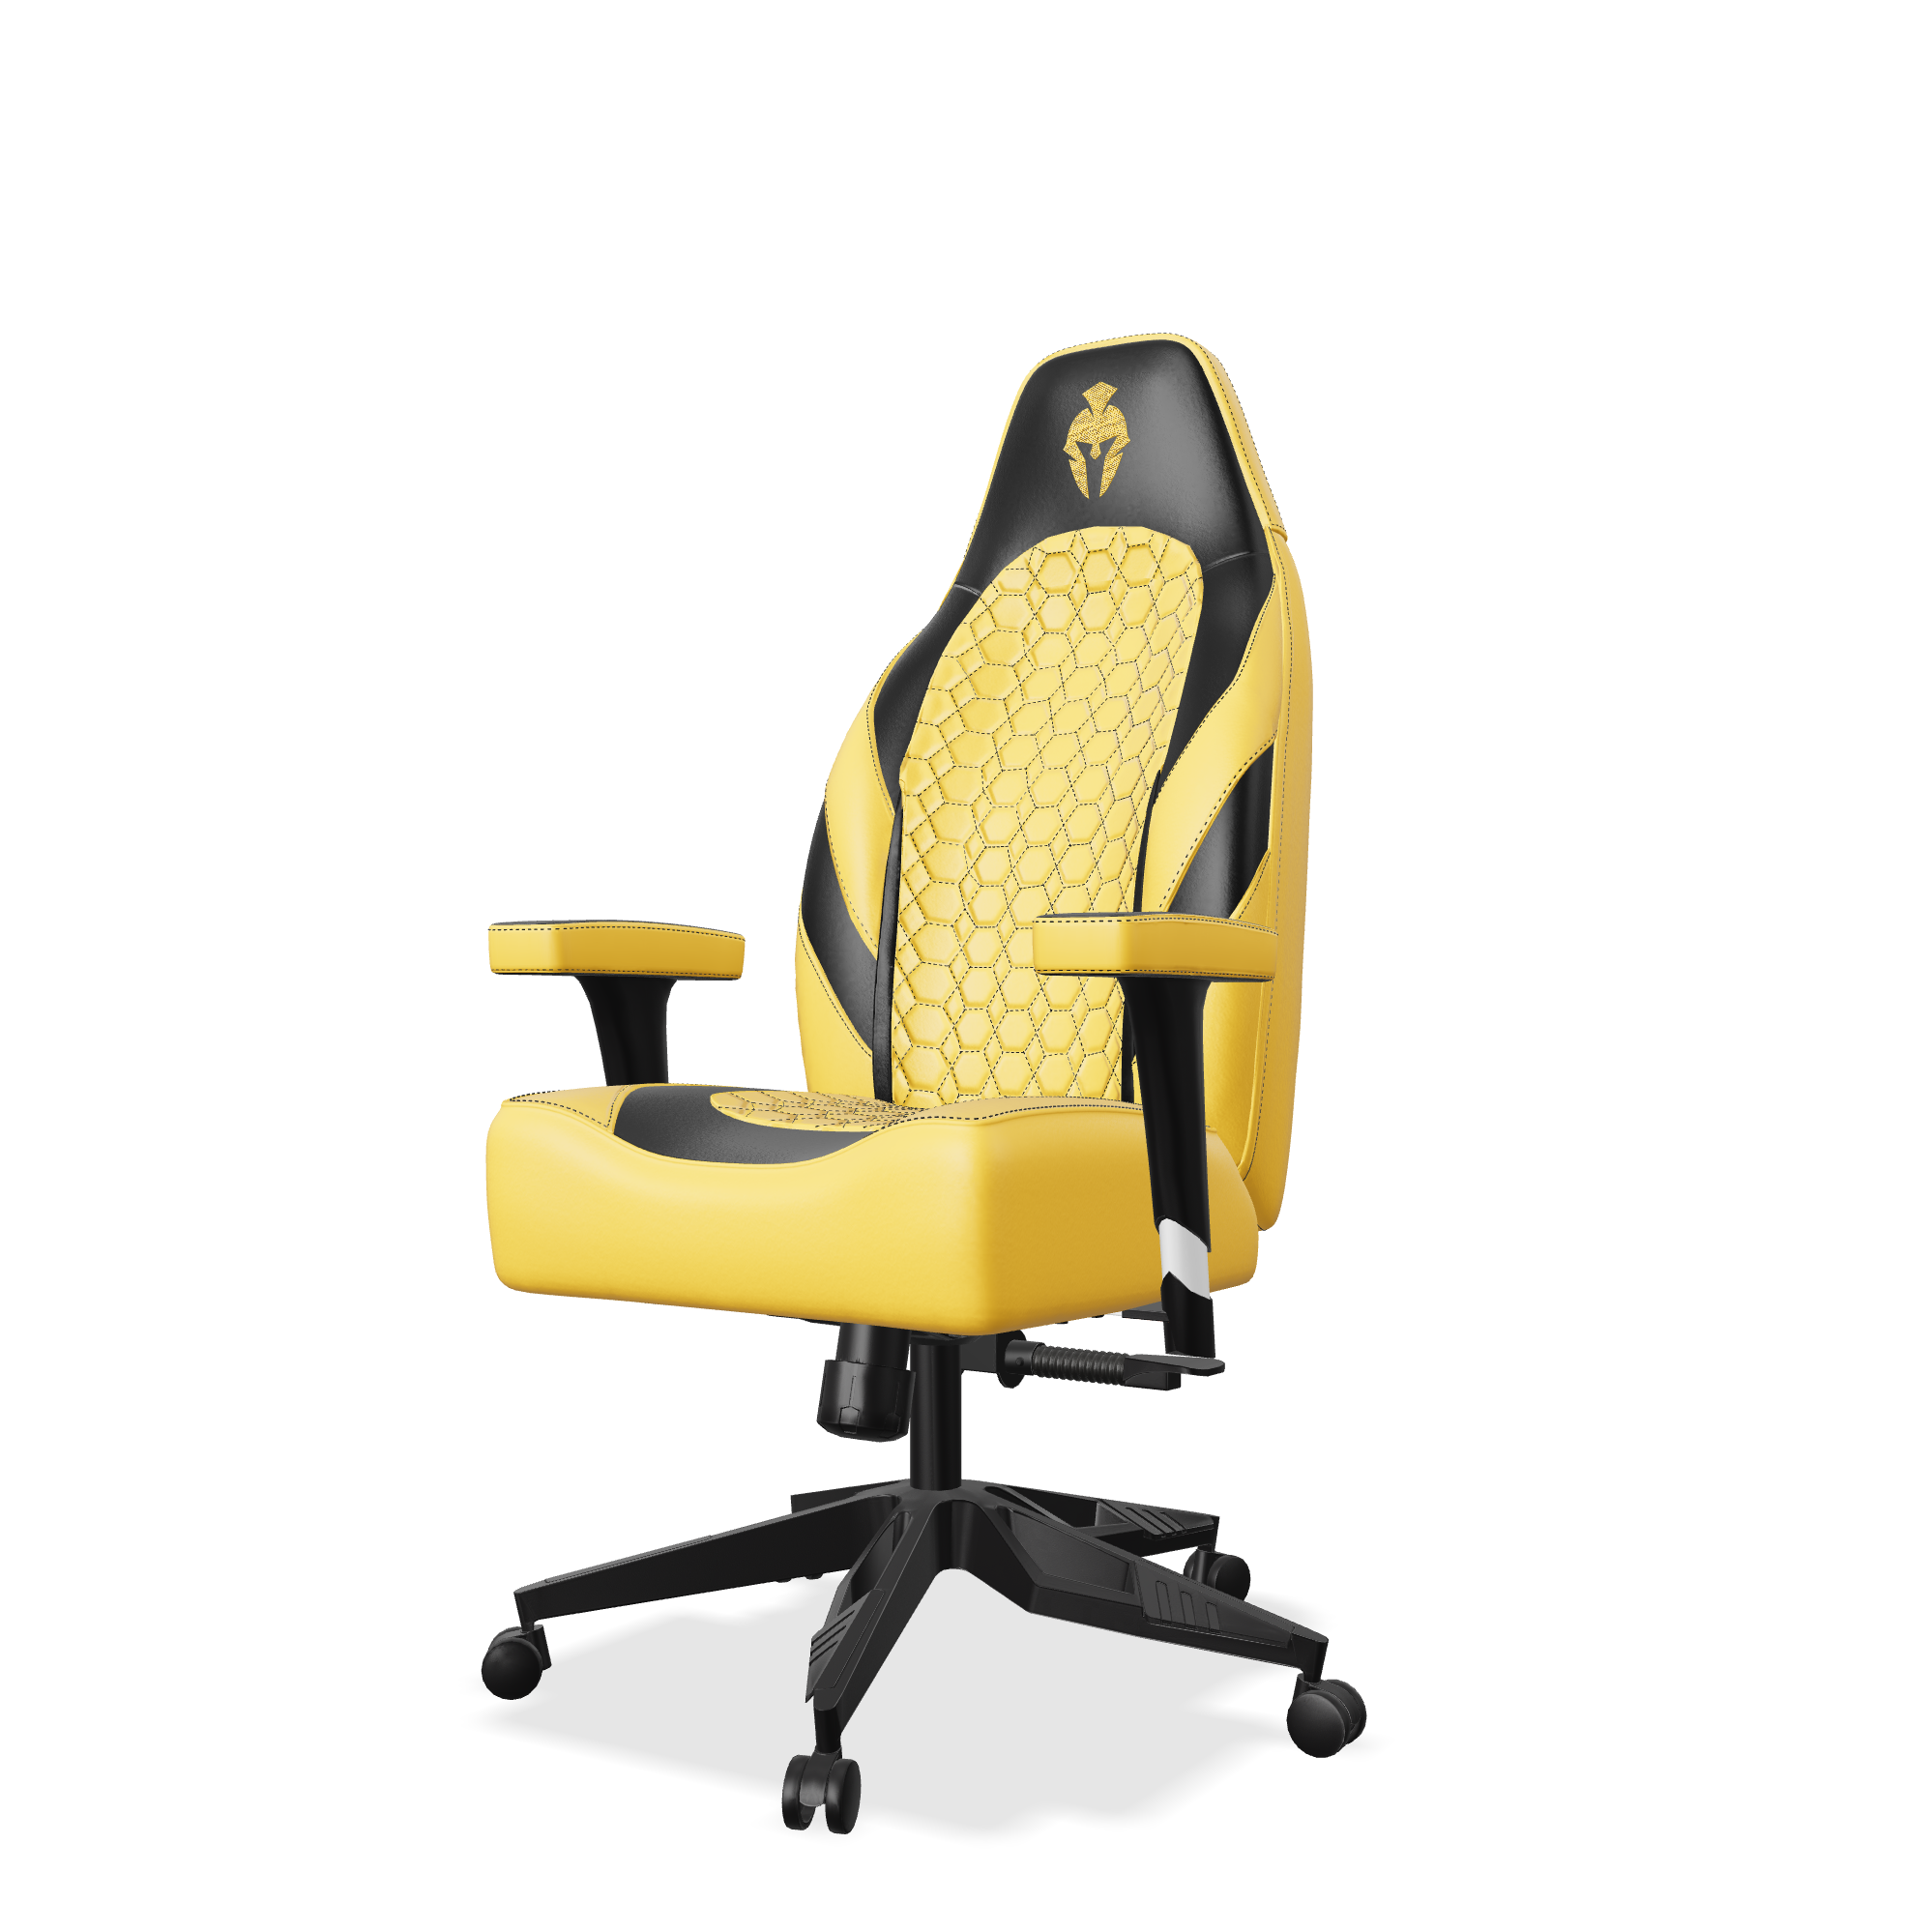 Black and Yellow Gaming Chair side view